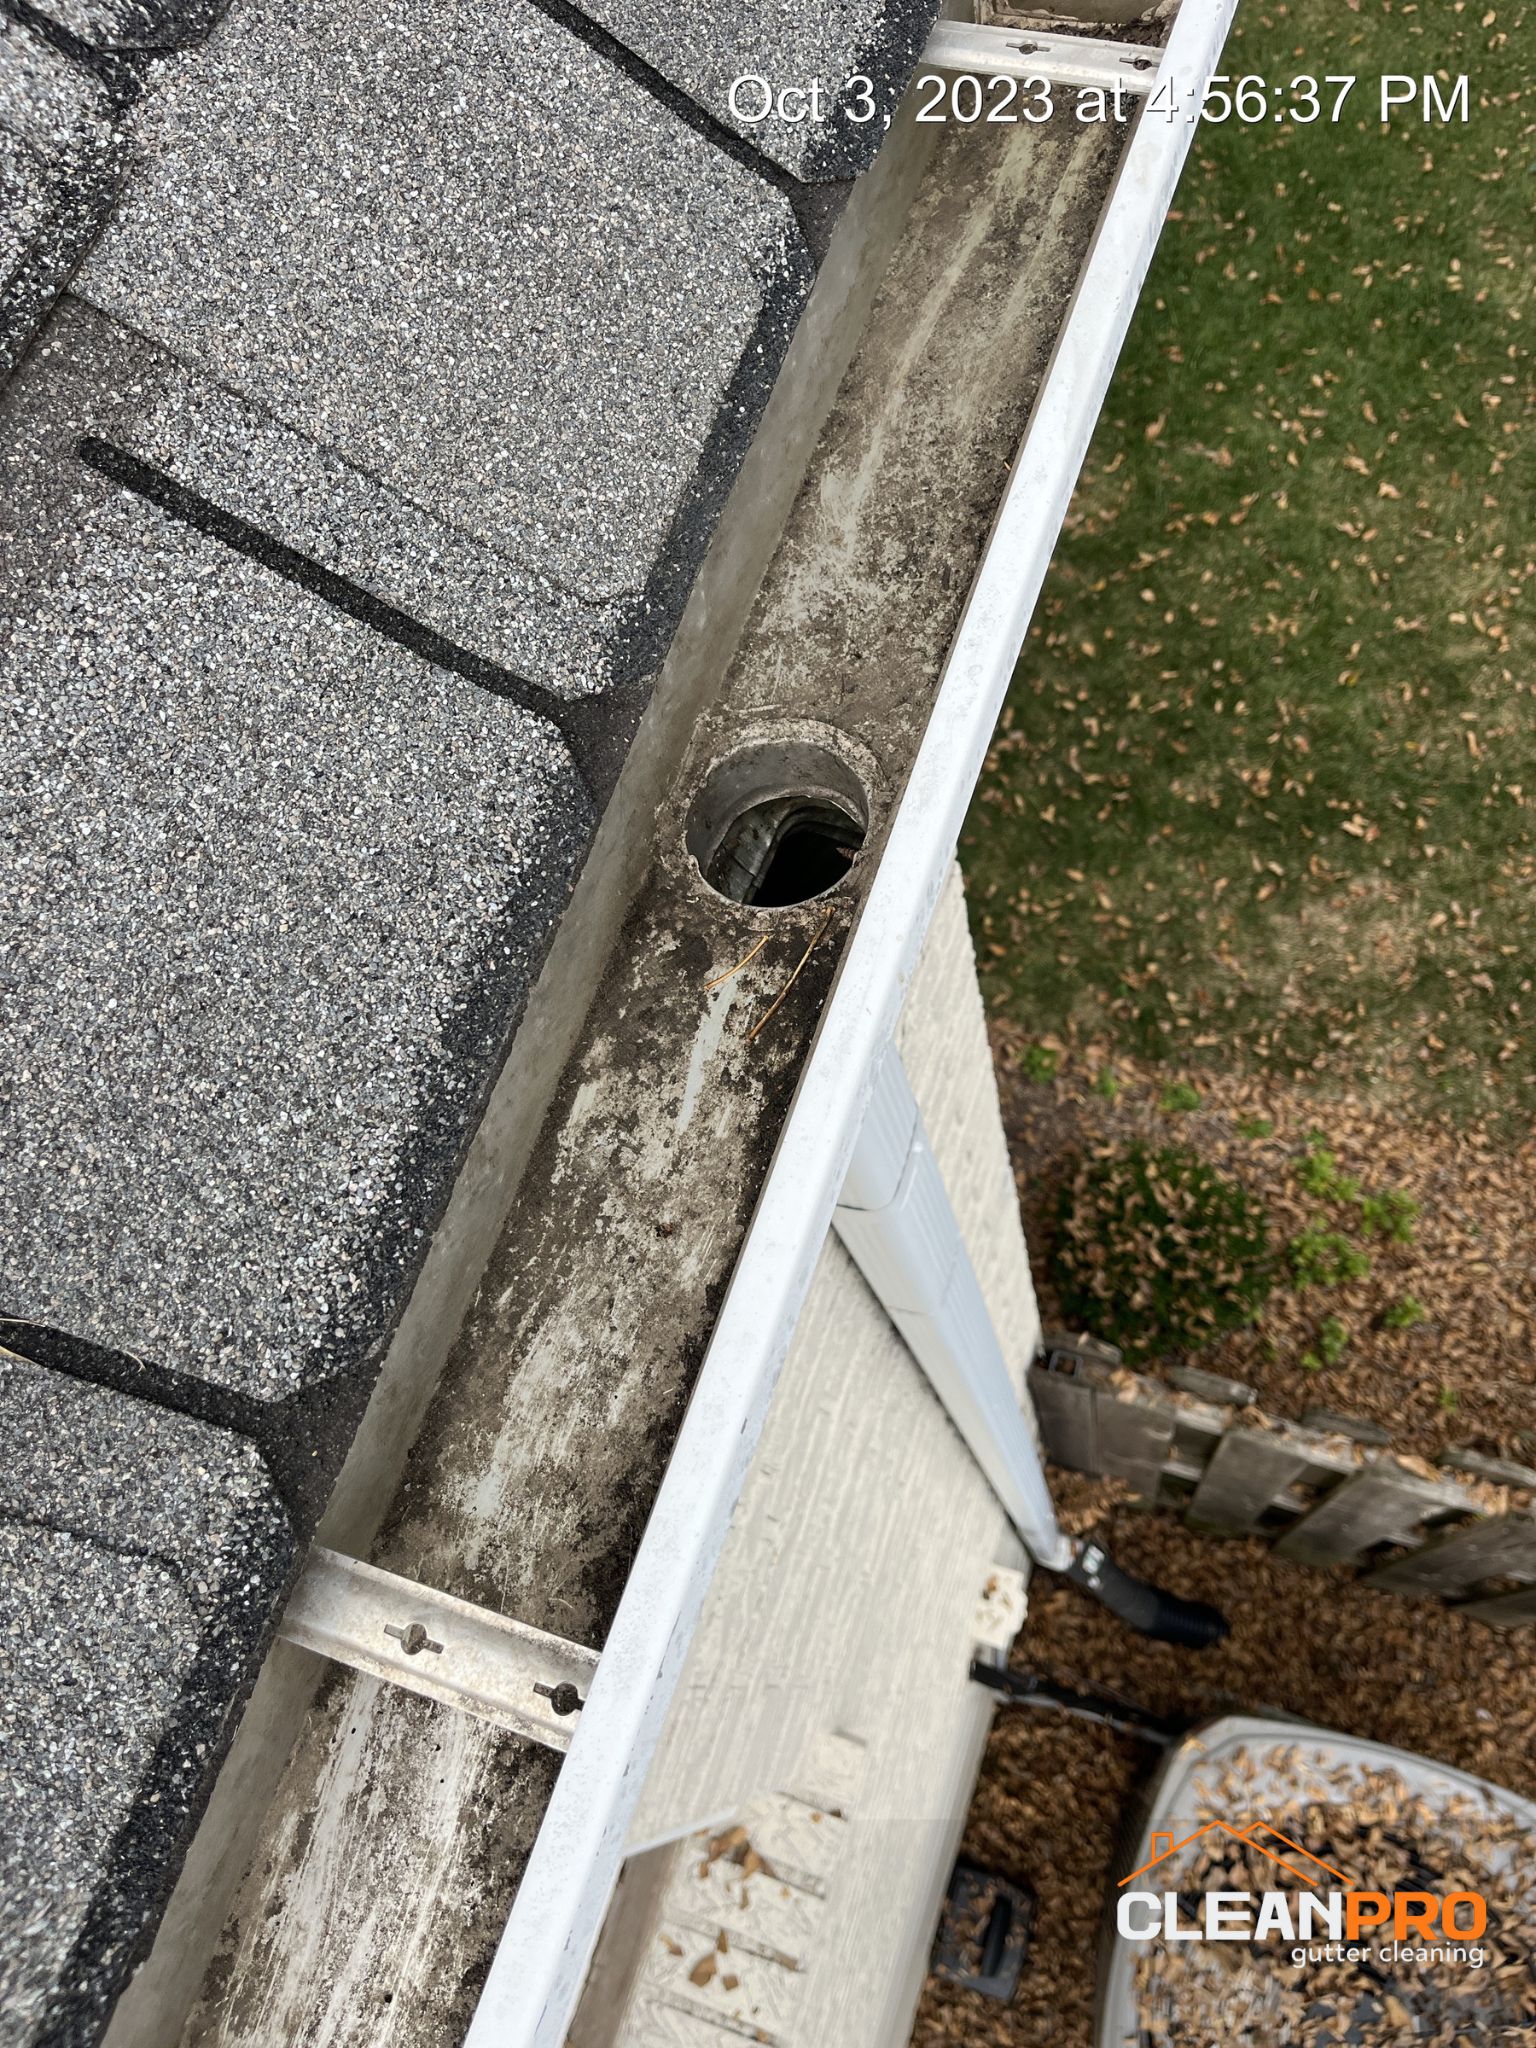 Quality Gutter Cleaning in Beaverton OR